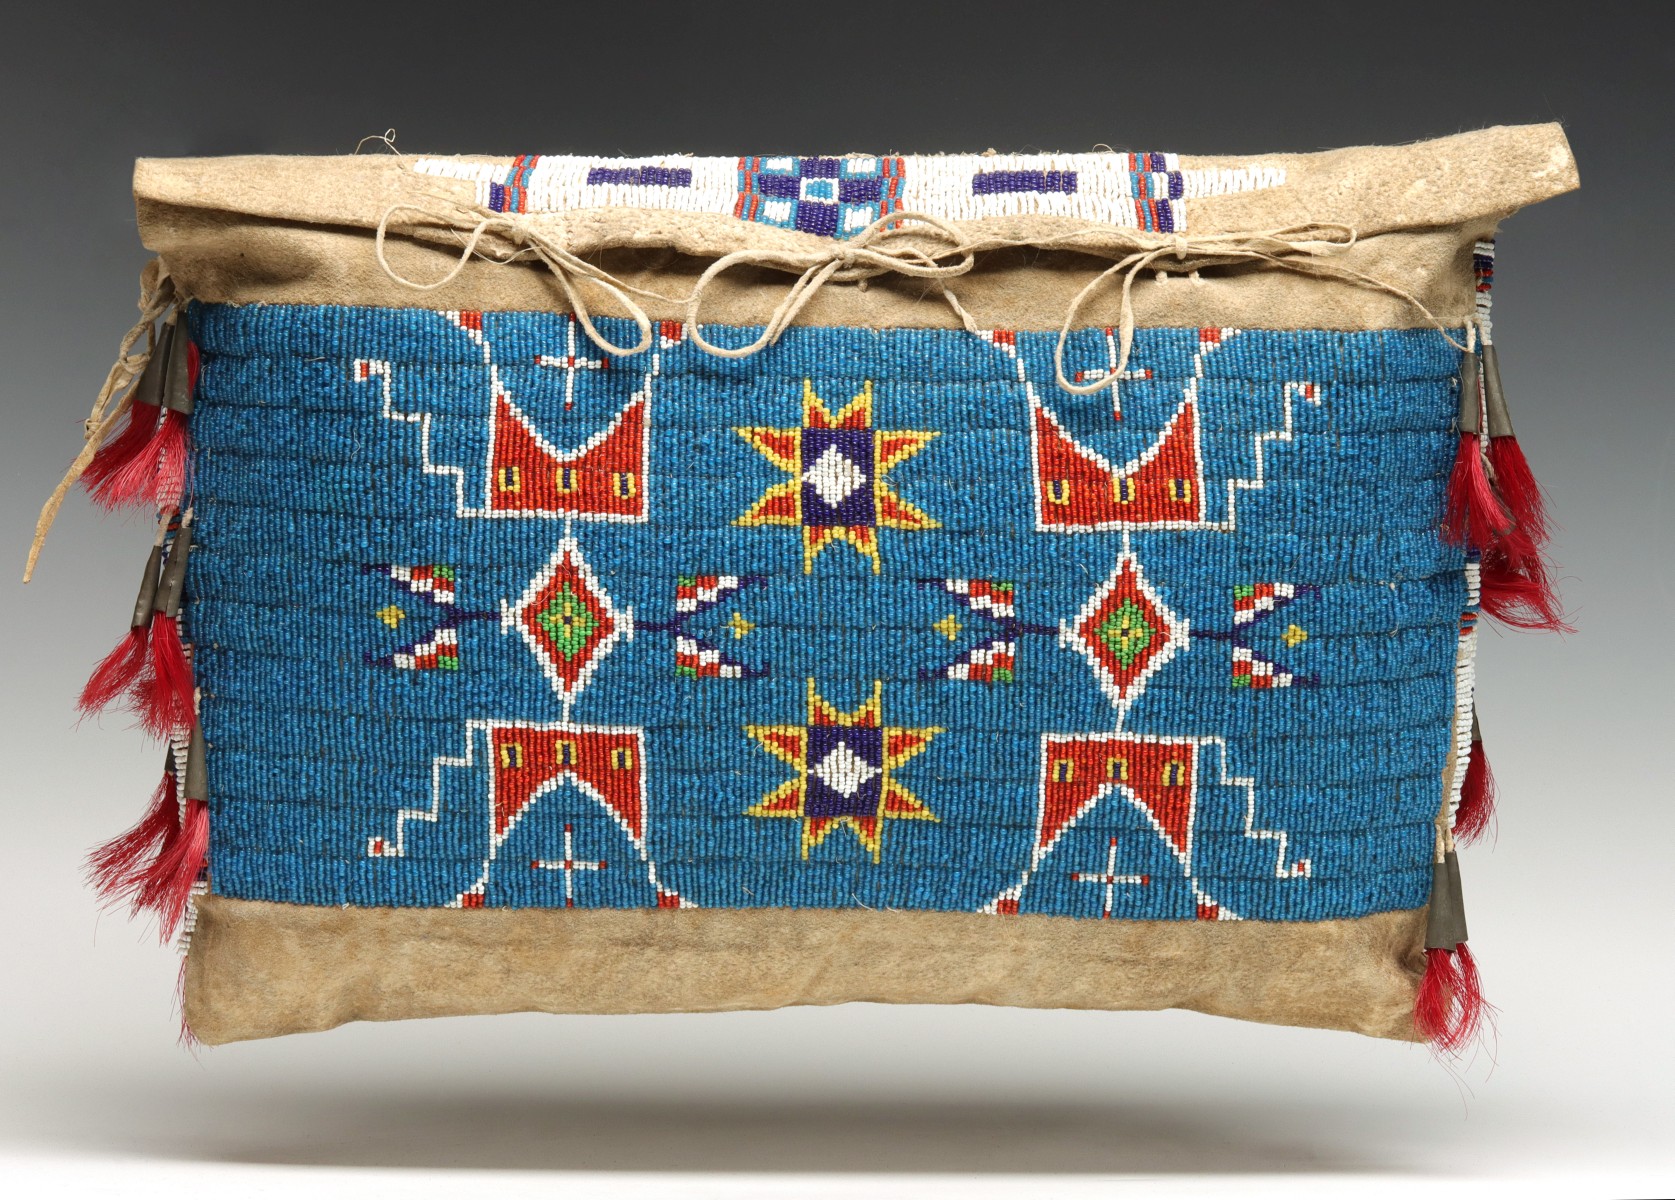 A VERY FINE 19TH CENTURY SIOUX BEADED POSSIBLE BAG